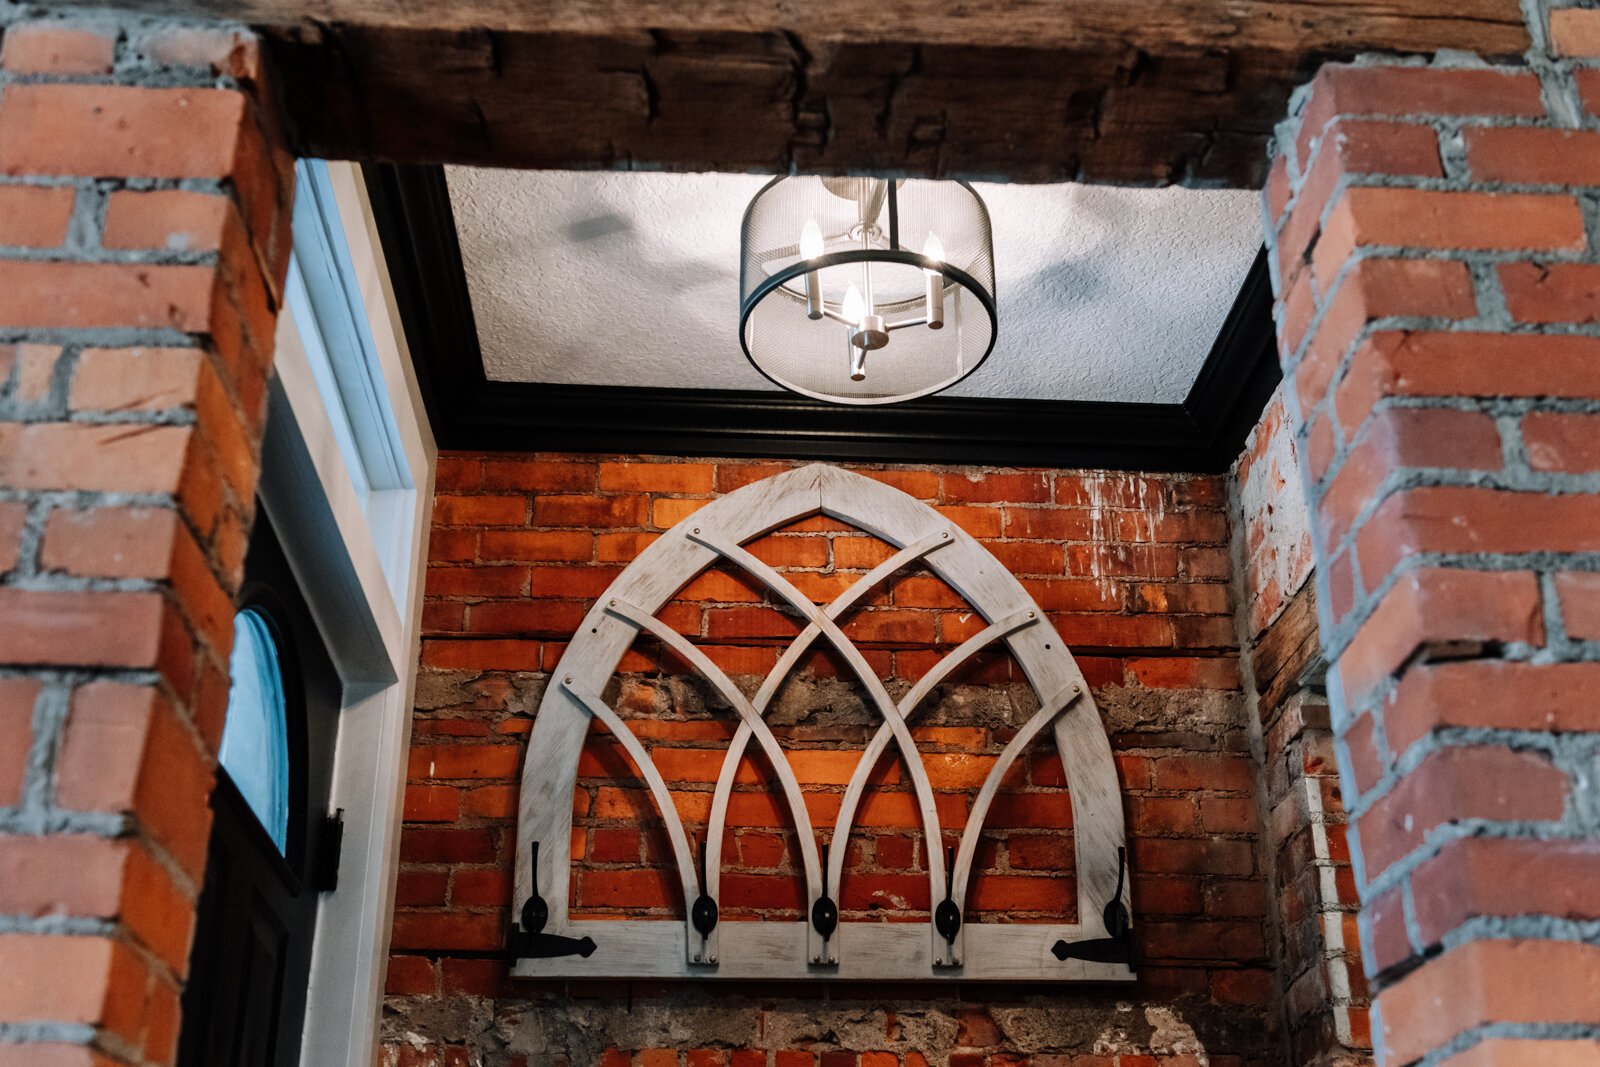 The entryway features exposed brick and coat hooks on the bottom floor.